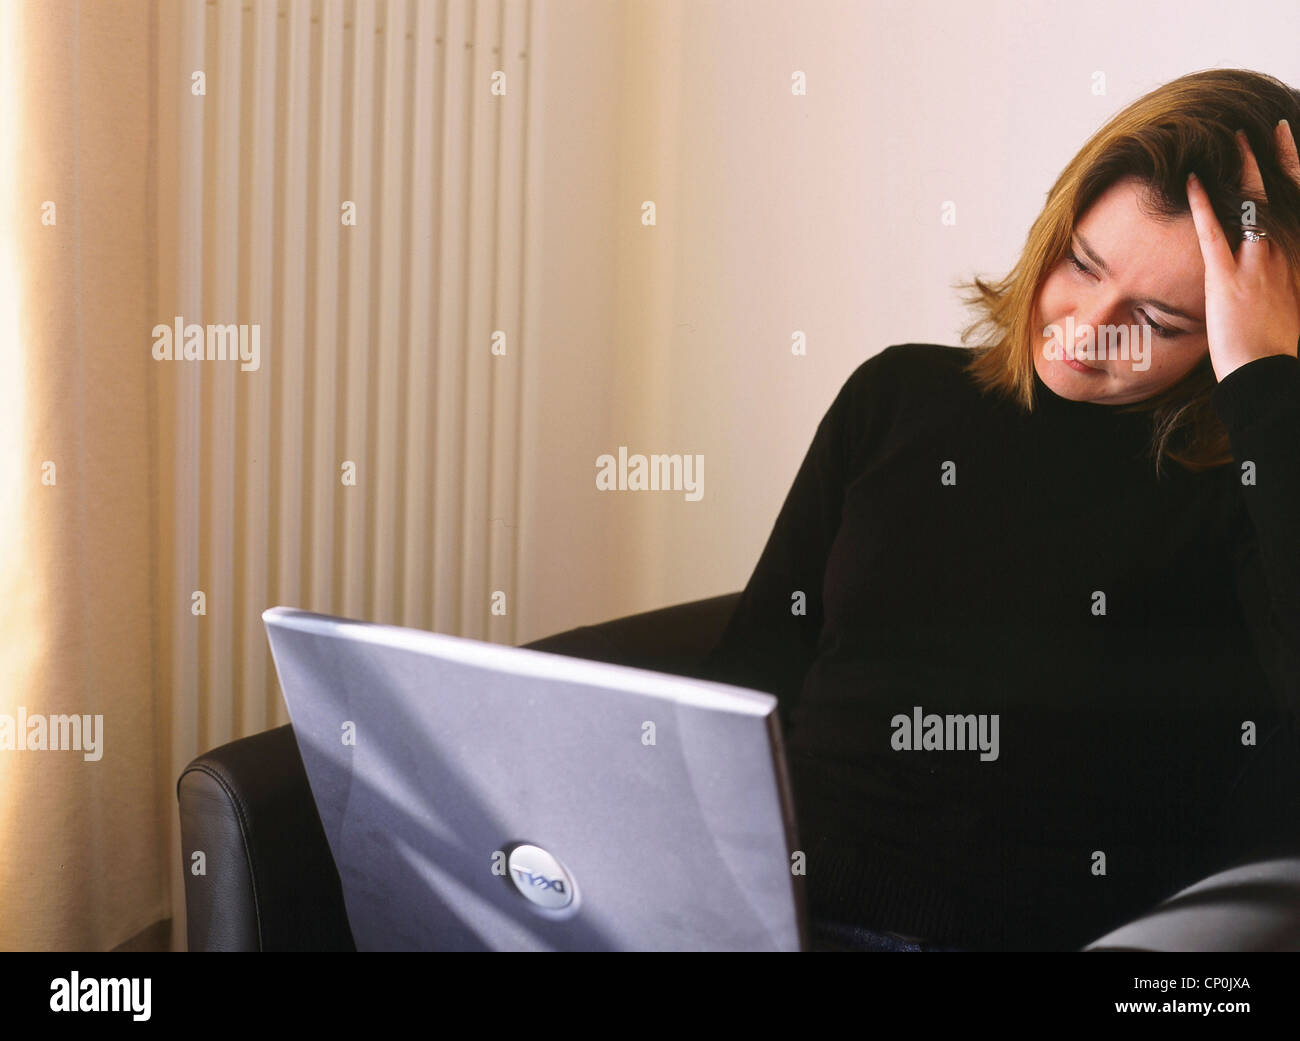 Young woman in her thirties with laptop. Stock Photo